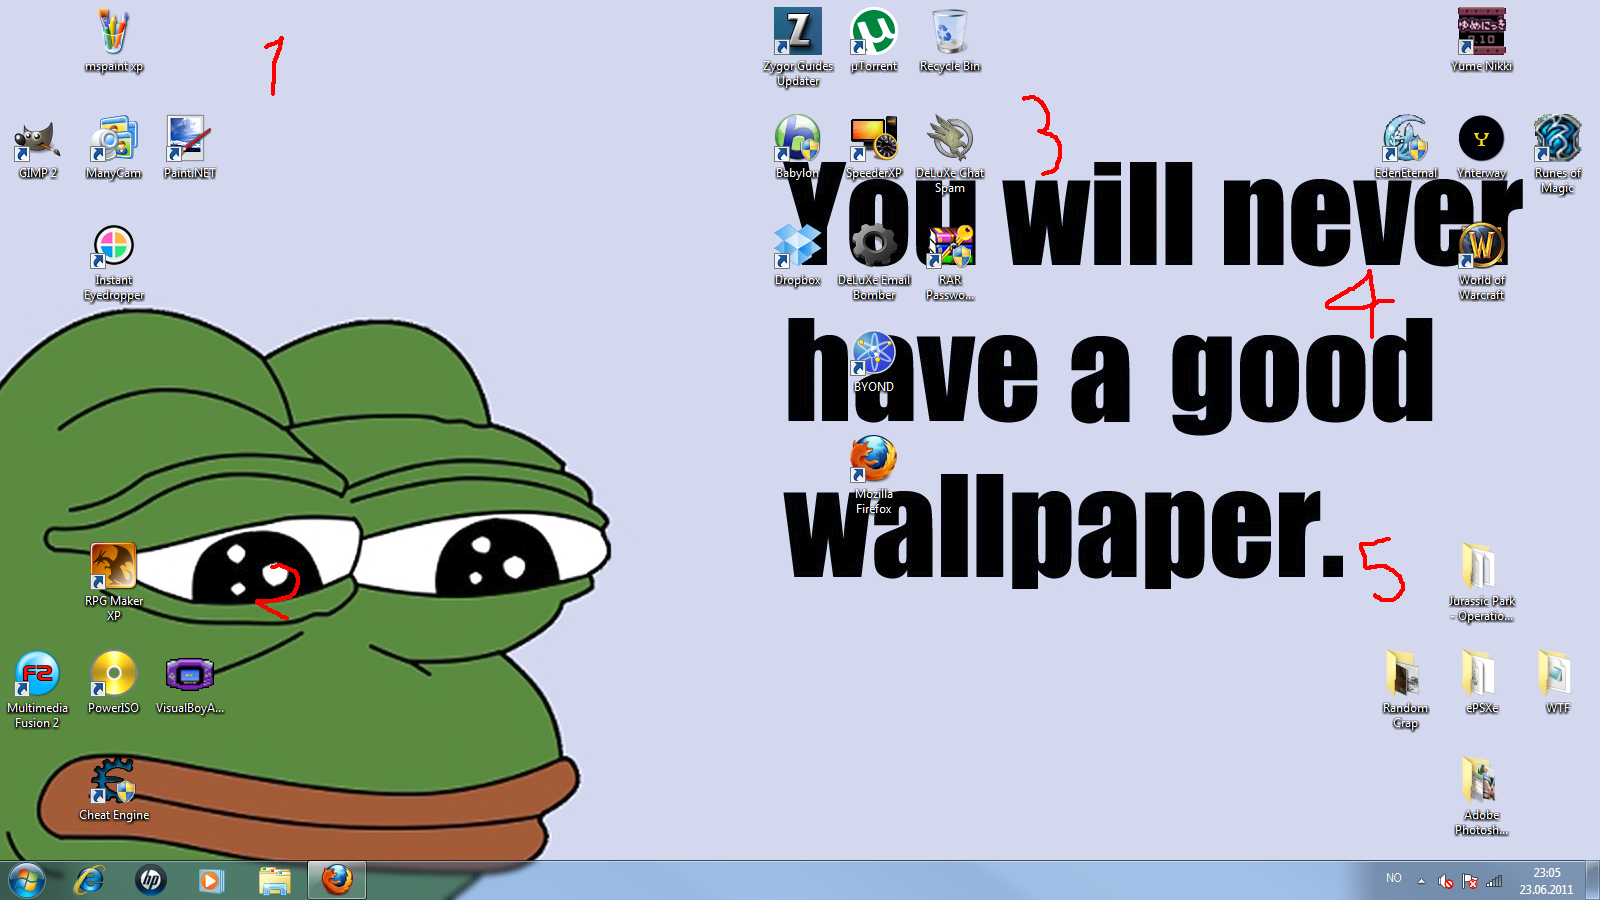 worst wallpaper ever by piffitypuff on DeviantArt